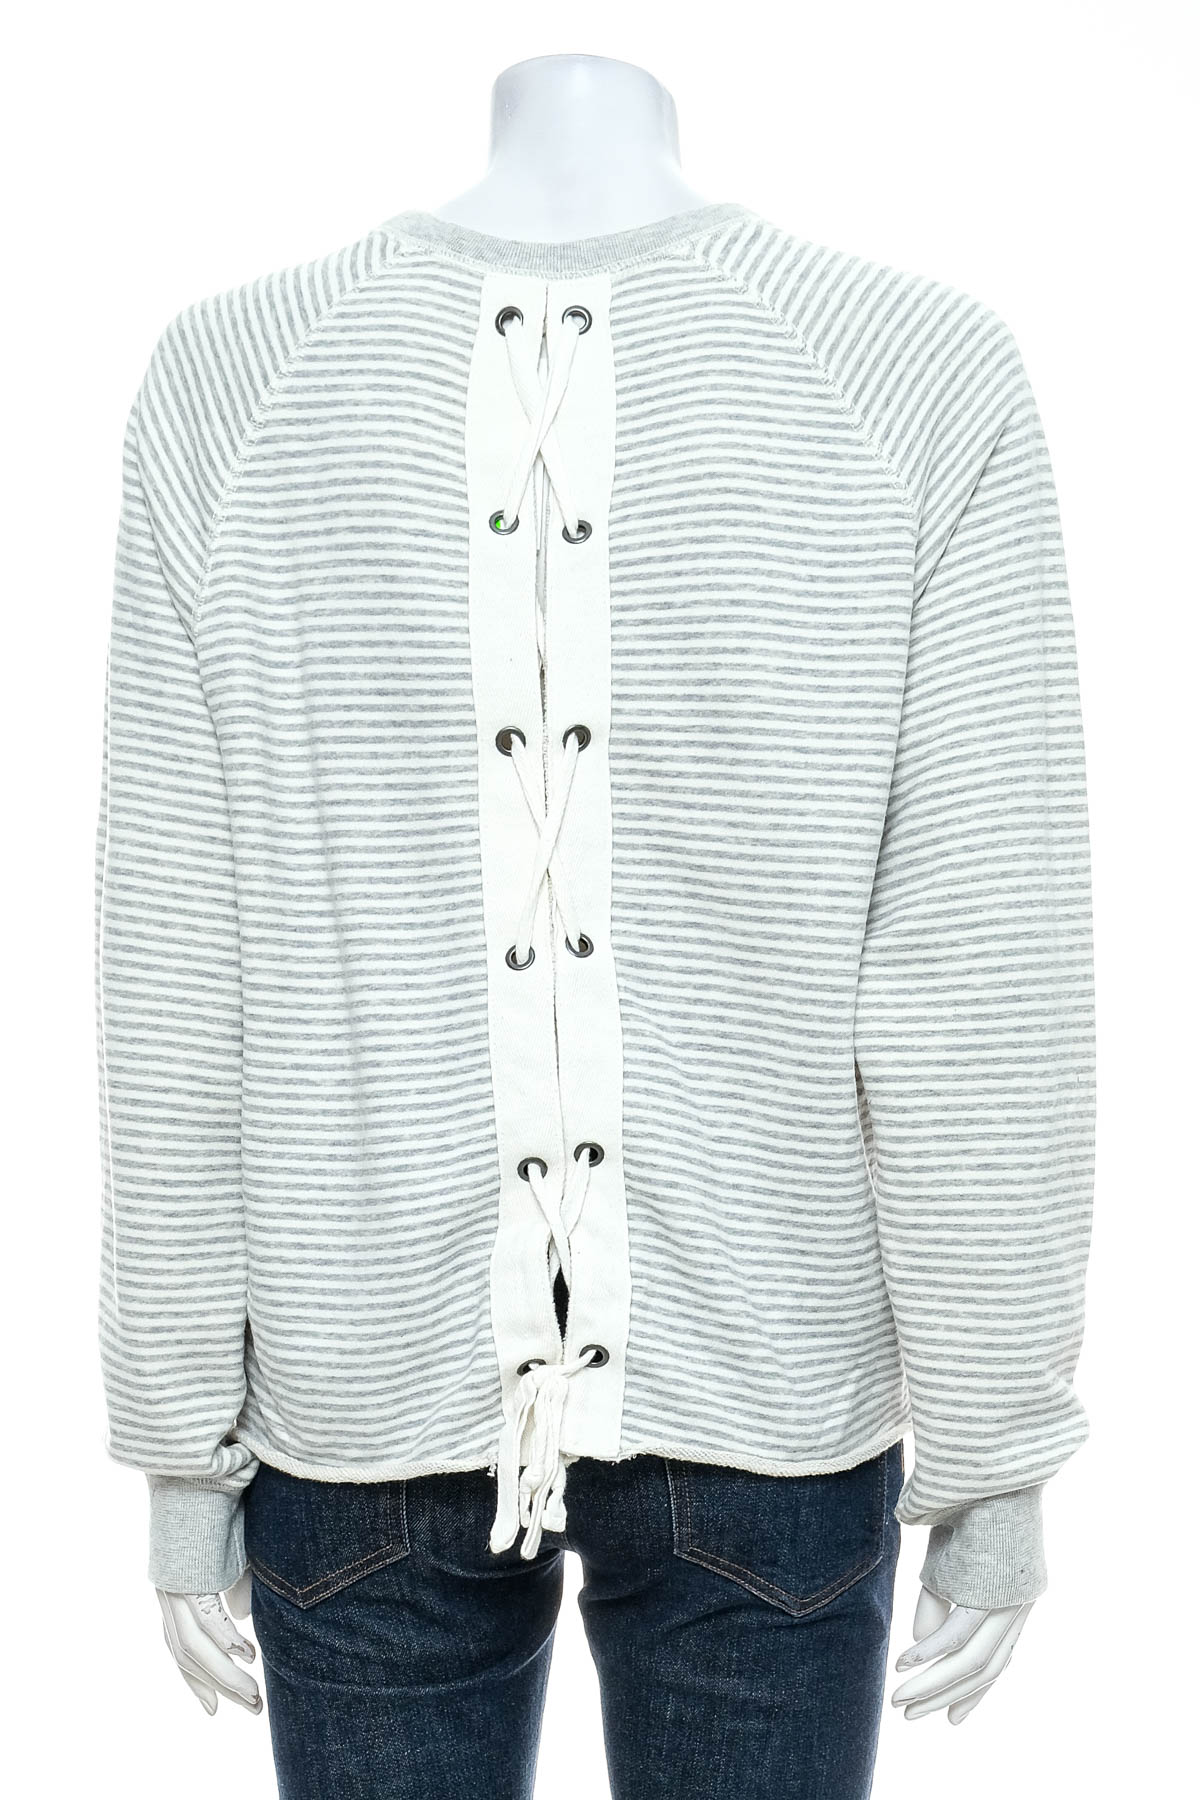 Women's blouse - Abercrombie & Fitch - 1